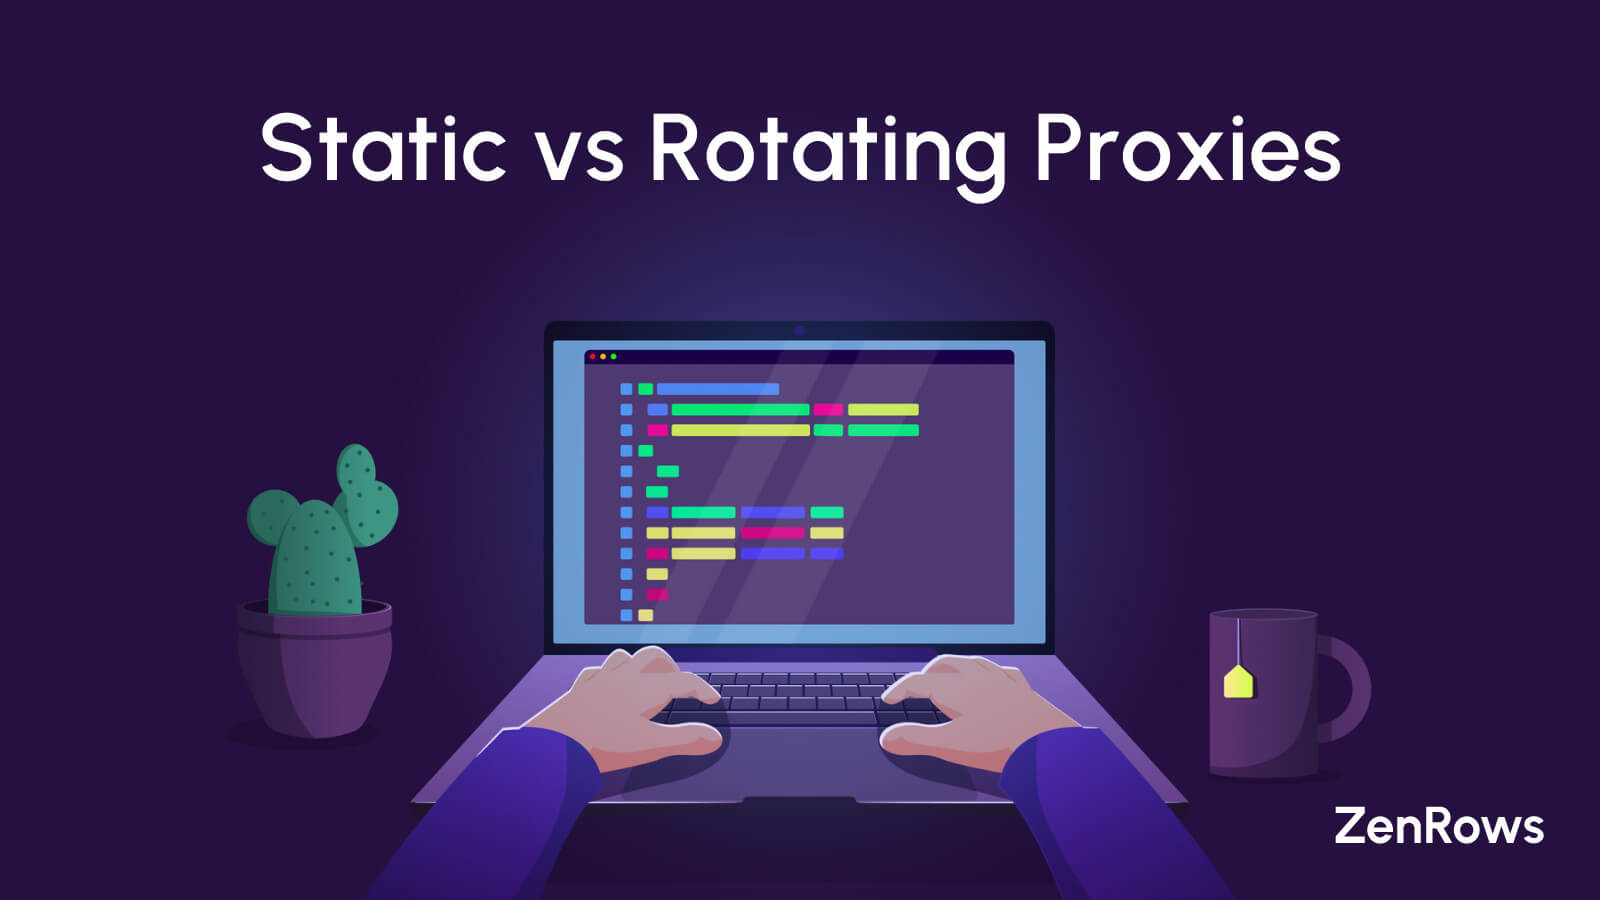 Static vs Rotating Proxies: the Definitive Comparison